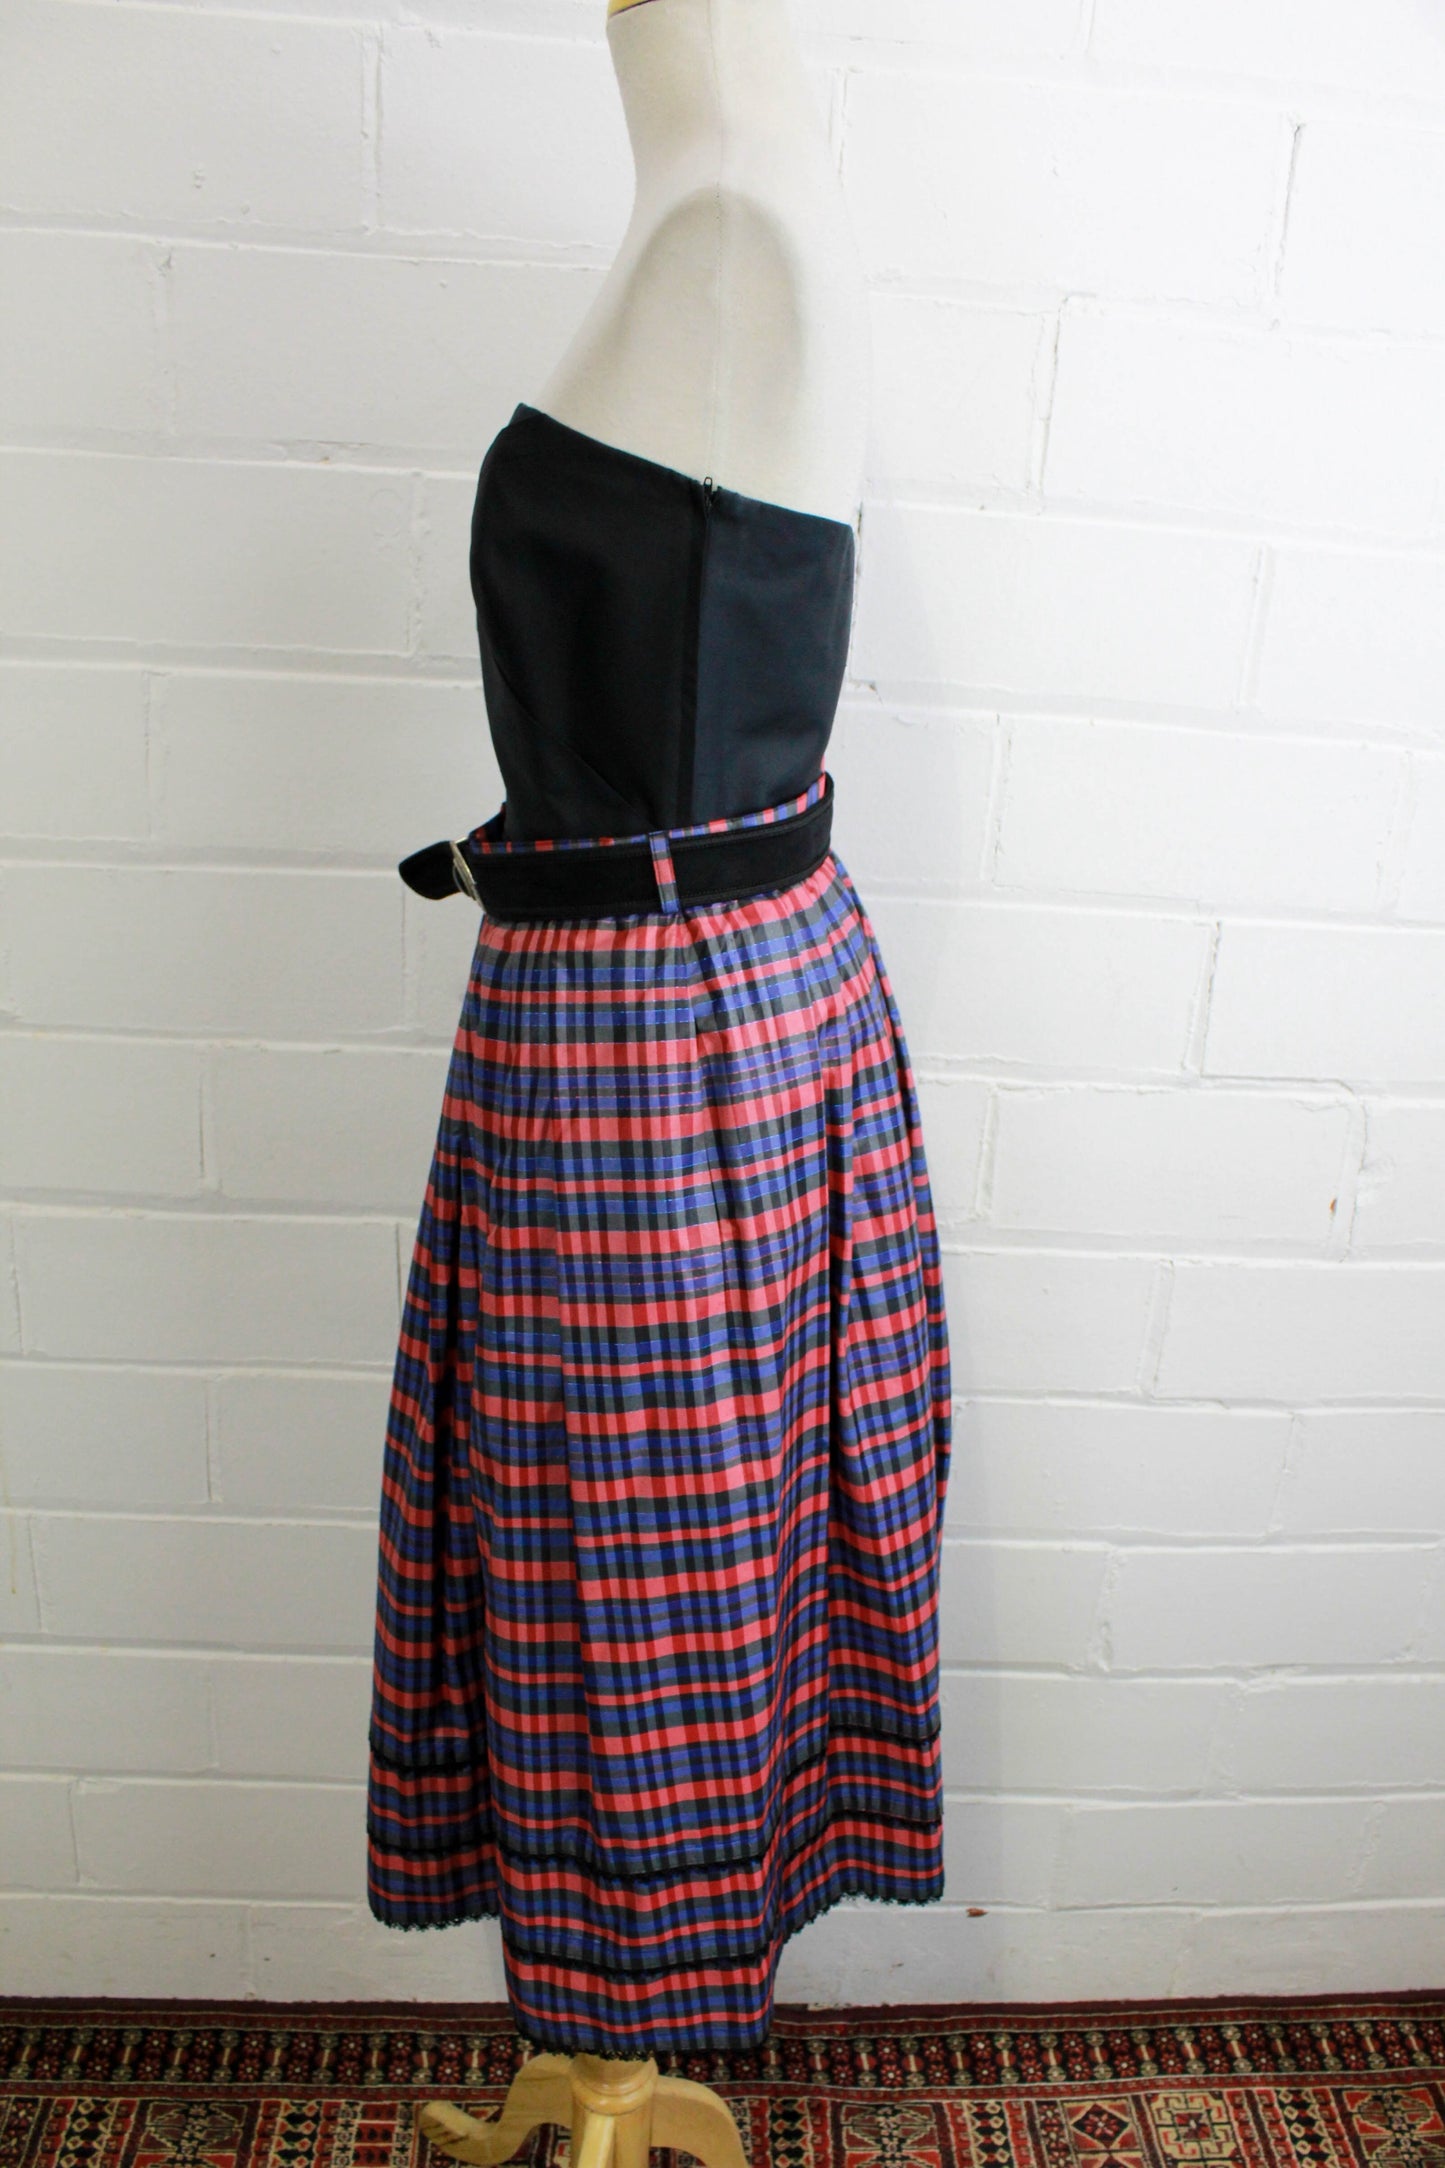 1980s austrian dirndl maxi skirt with belt, blue and red plaid taffeta, side view